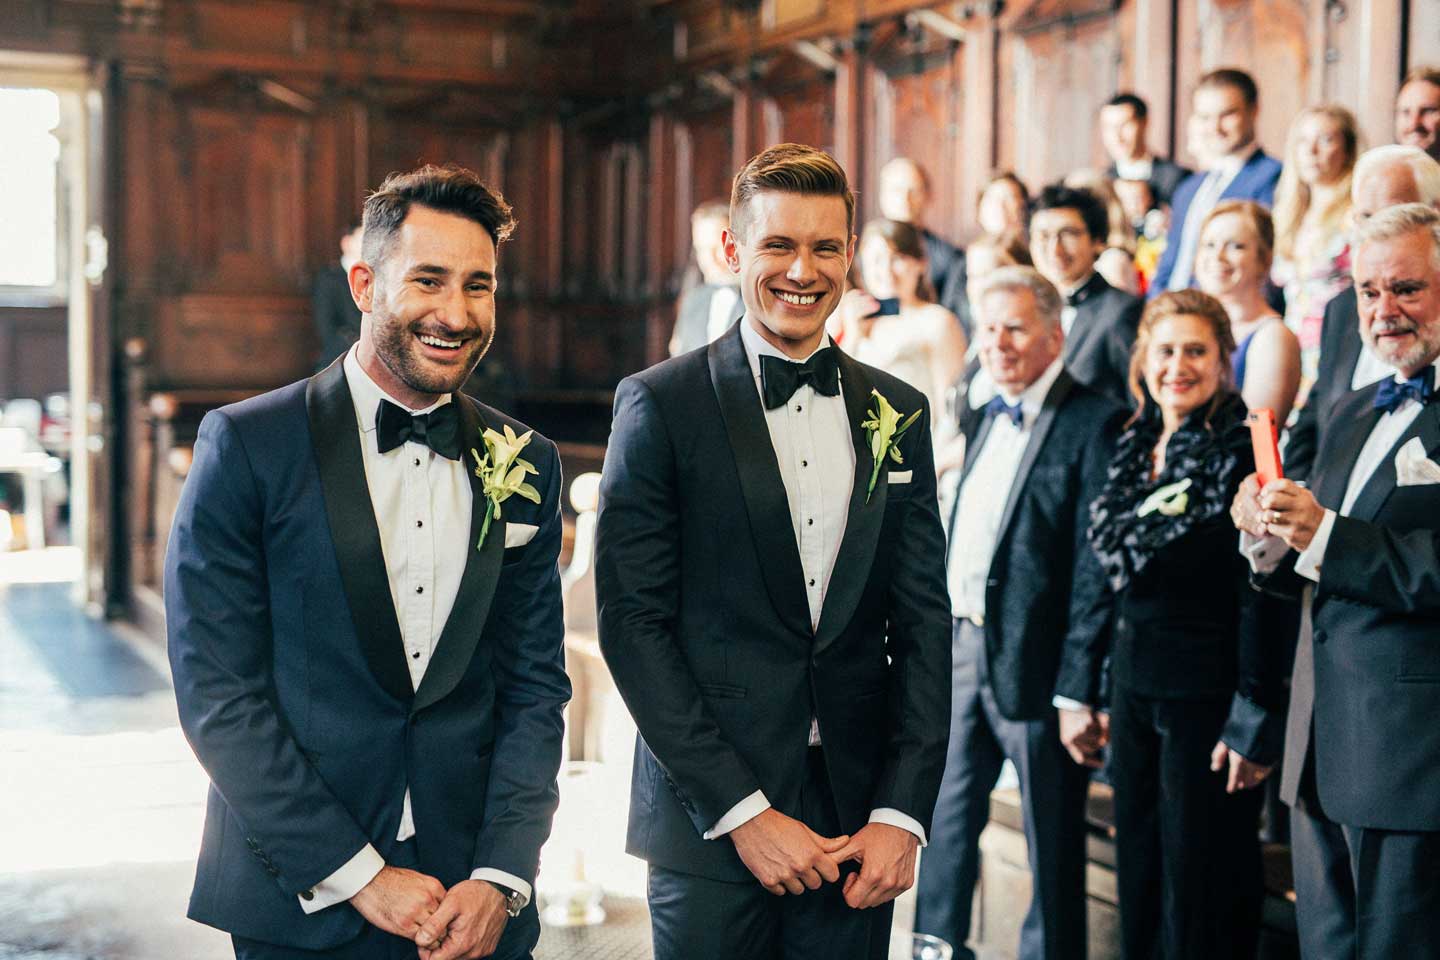 Aaron and Phil at ceremony at their gay wedding at the Bodelian Oxford images copyright Stu Heppell via The Gay Wedding Guide 3 5